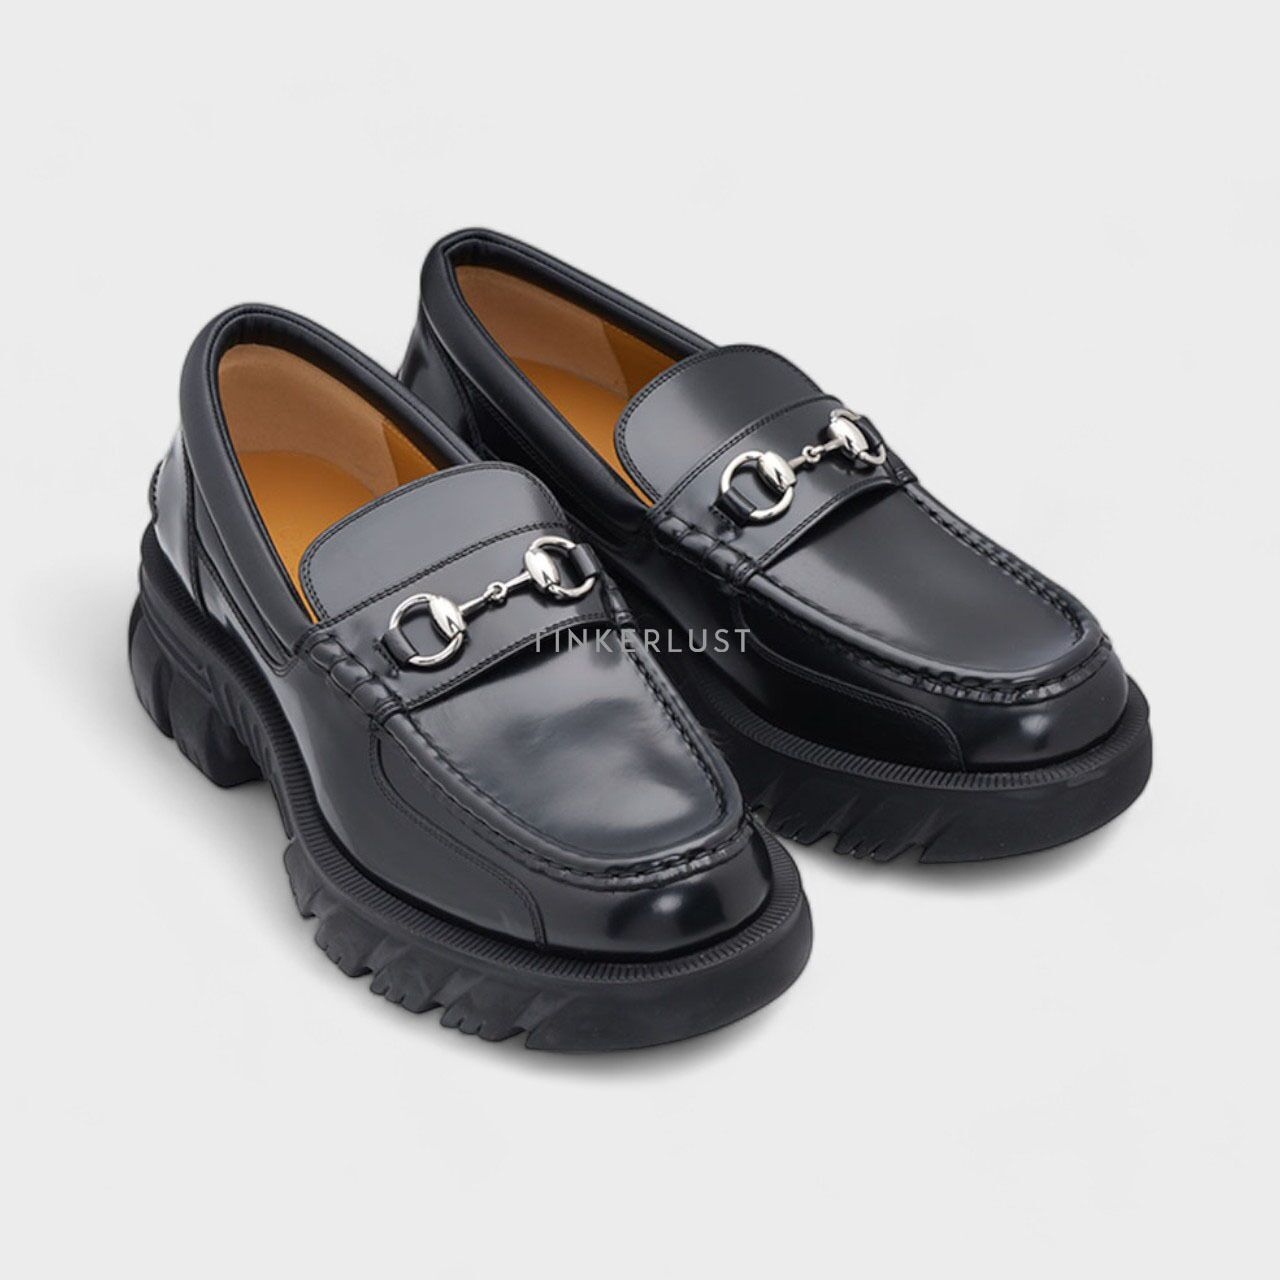 Gucci Men Horsebit Rubber Sole Loafers 40mm in Black Smooth Leather SHW Oxfords